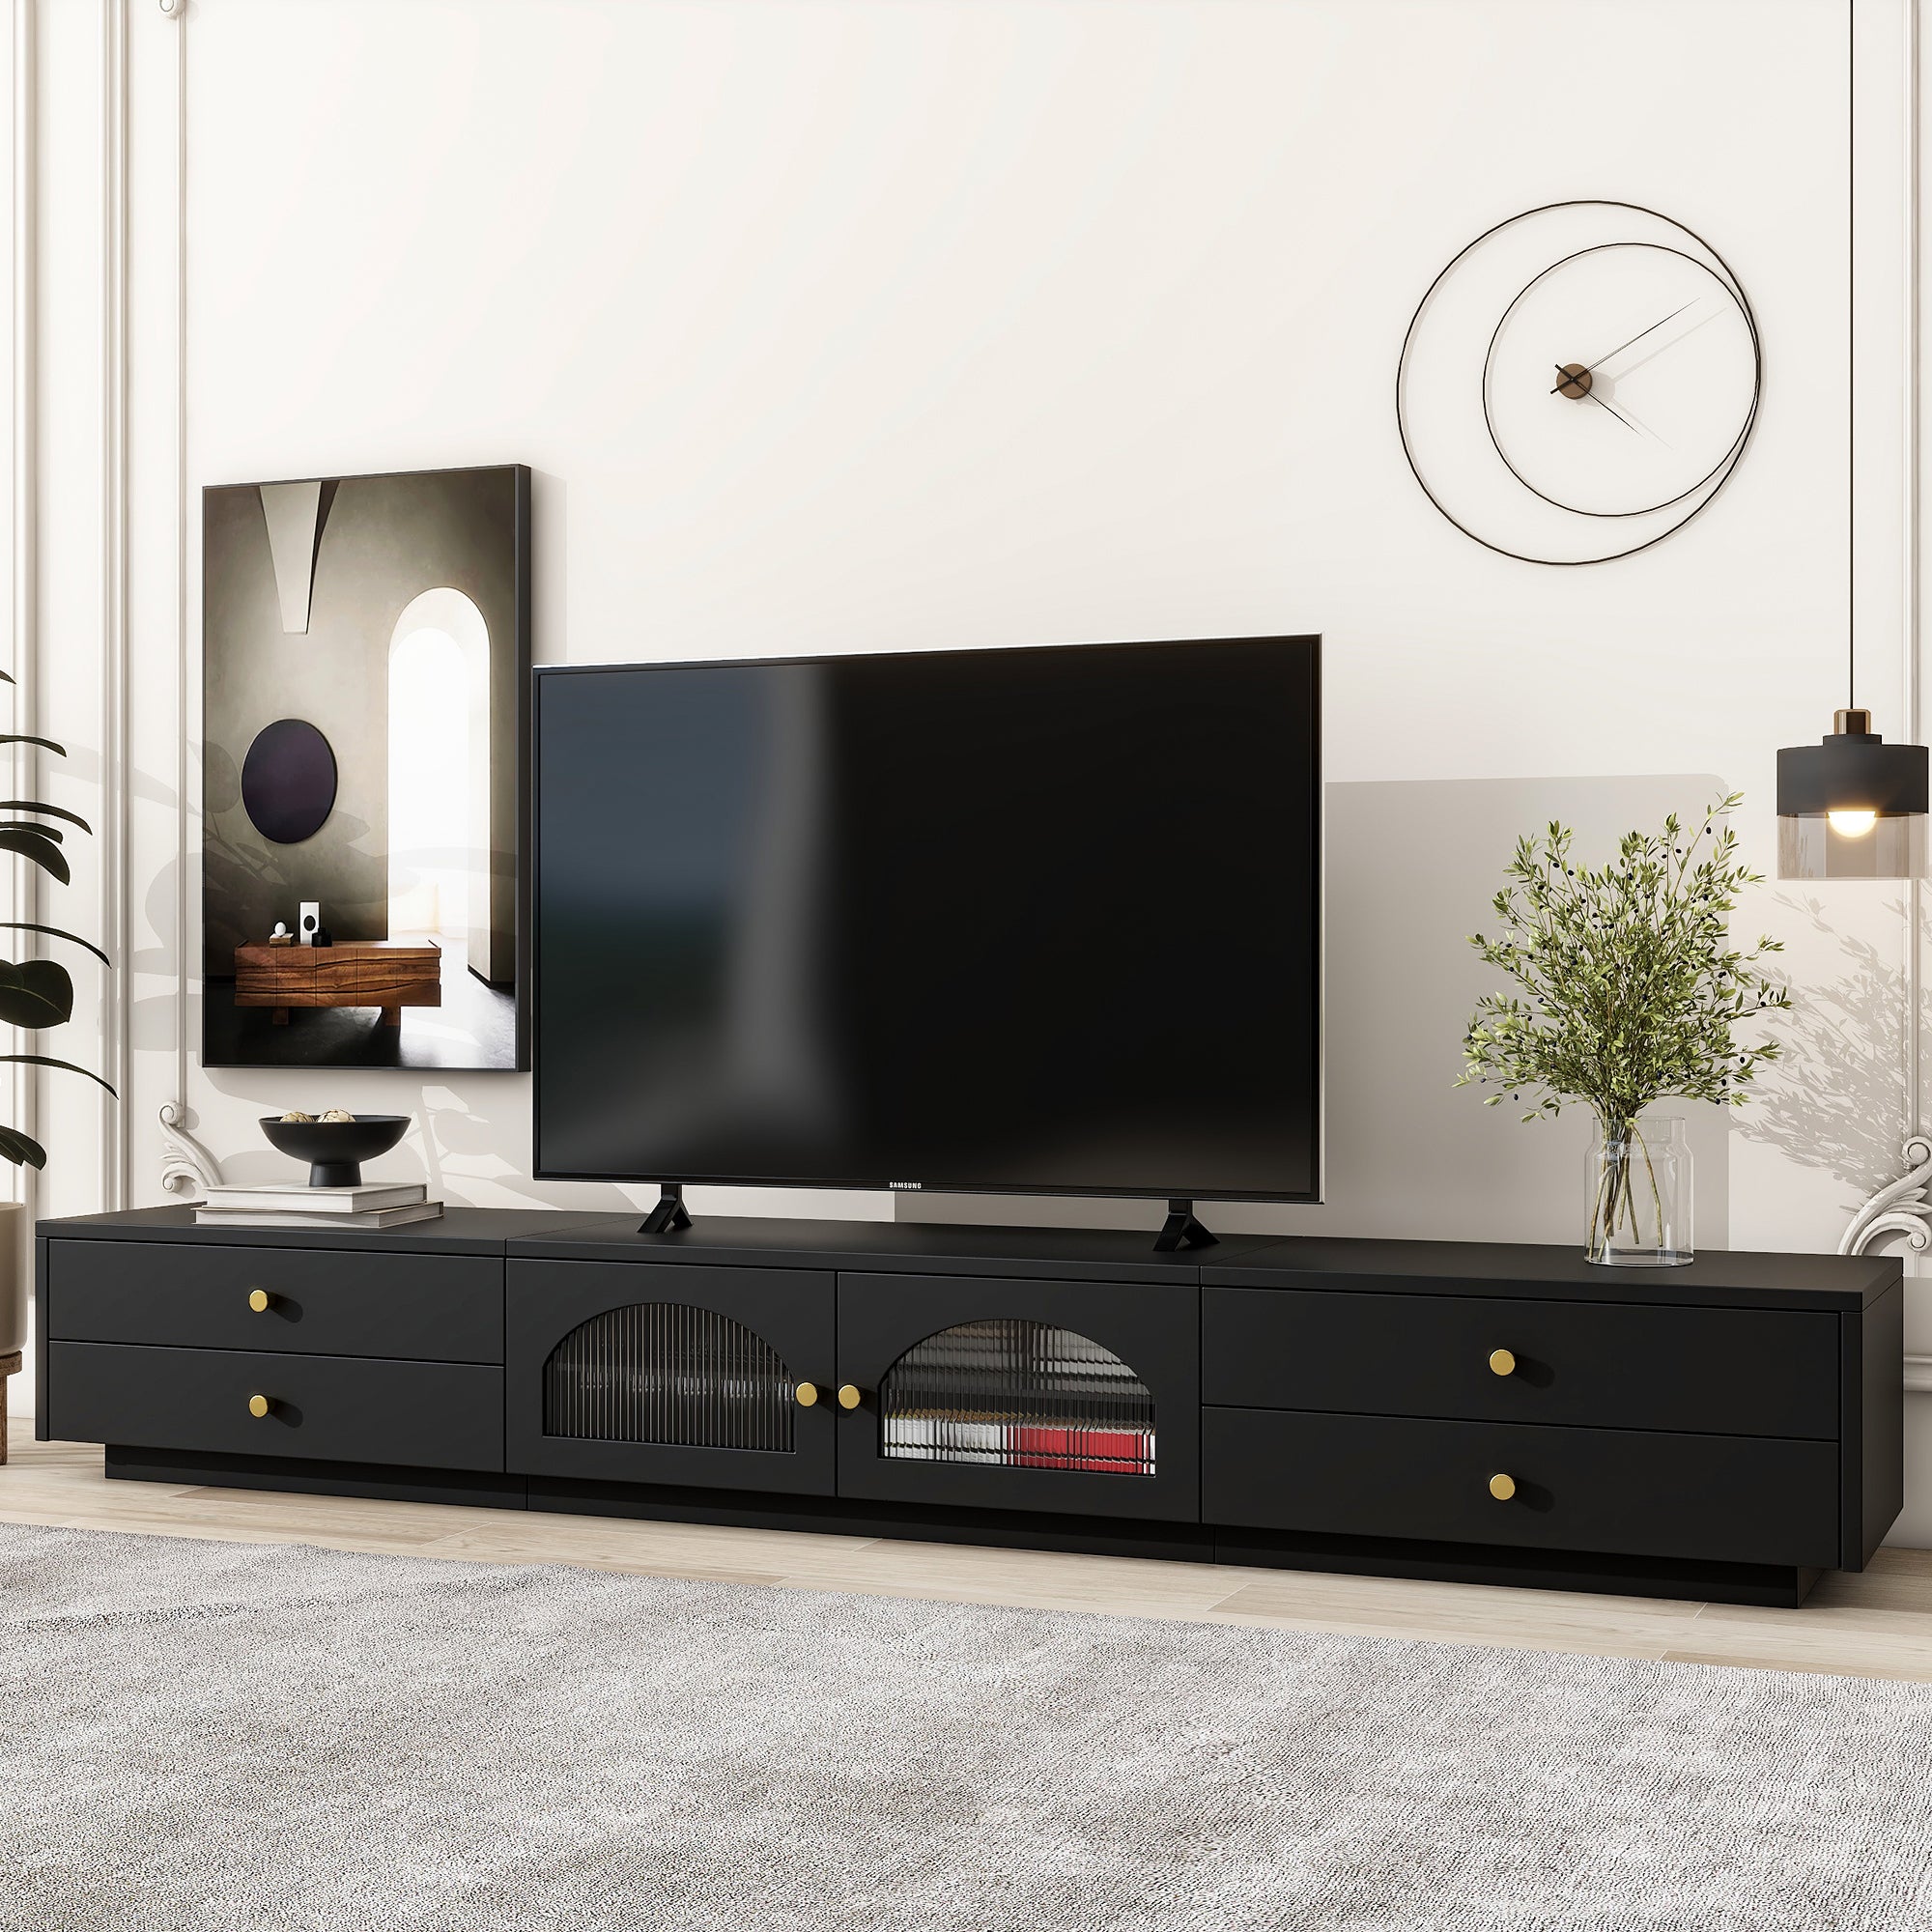 ON TREND Luxurious TV Stand with Fluted Glass Doors black-primary living space-90 inches or